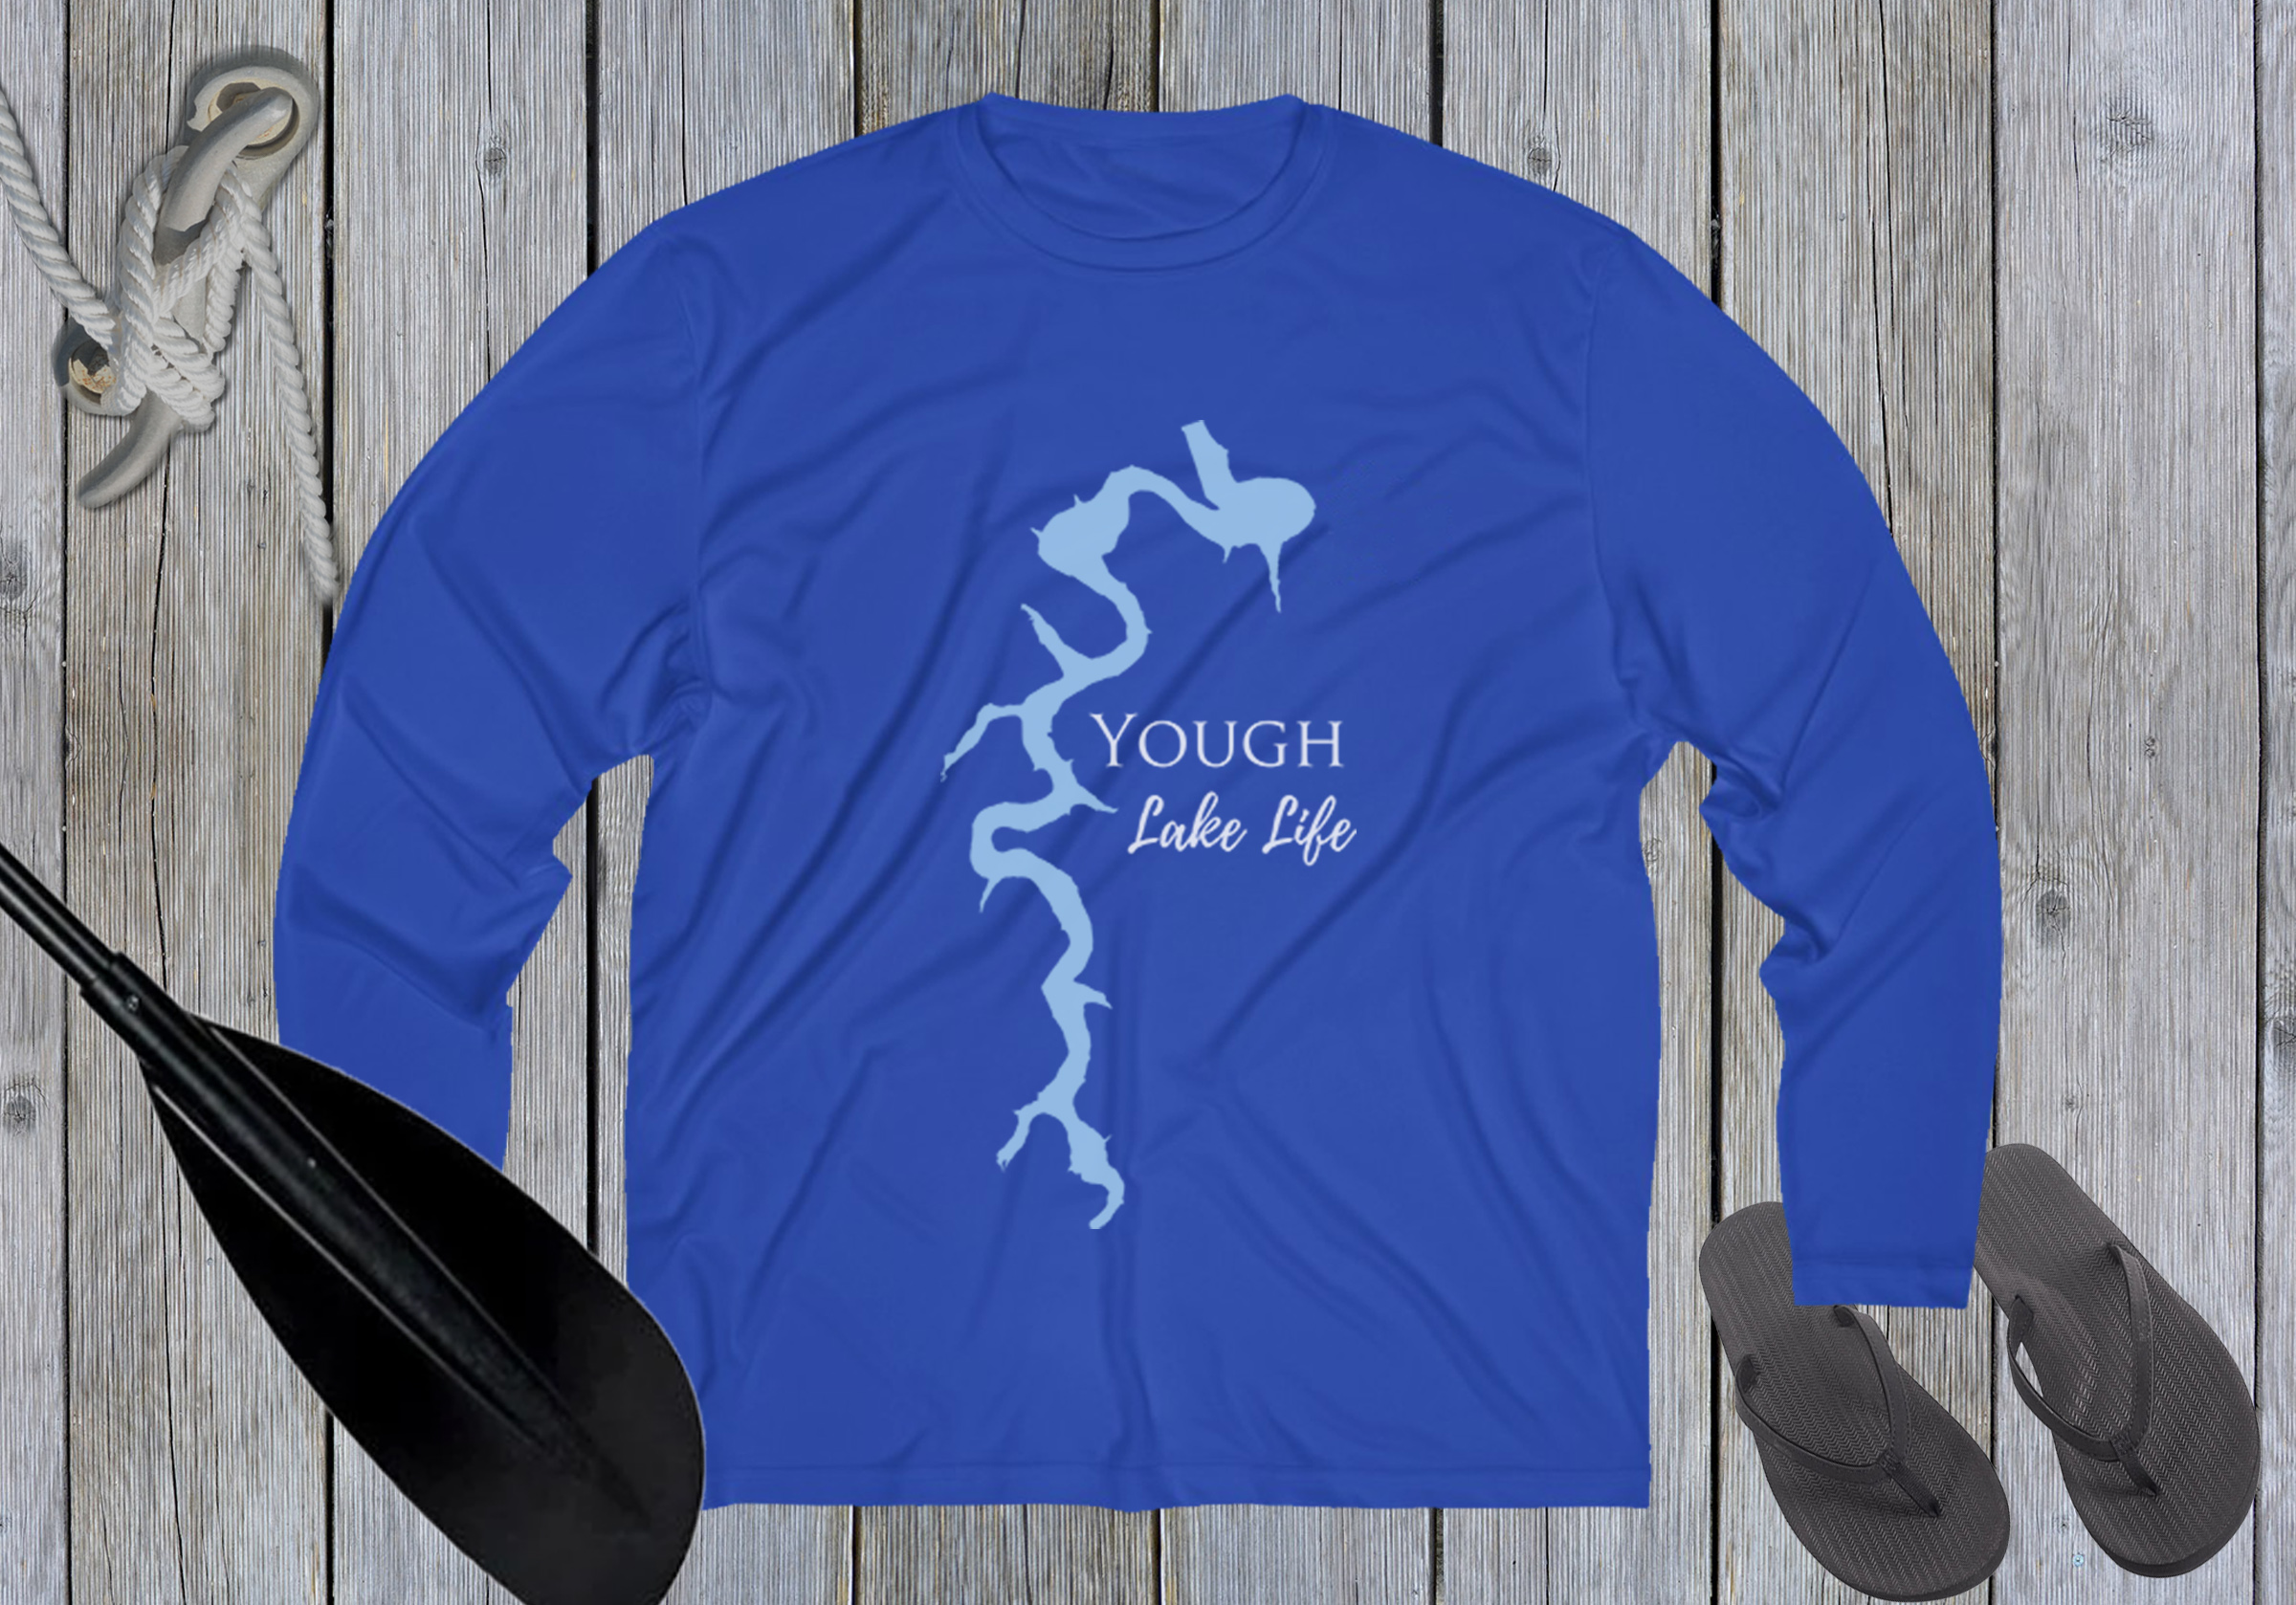 Yough Lake Life Dri-fit Boating Shirt - Breathable Material- Men's Long Sleeve Moisture Wicking Tee - Maryland Lake